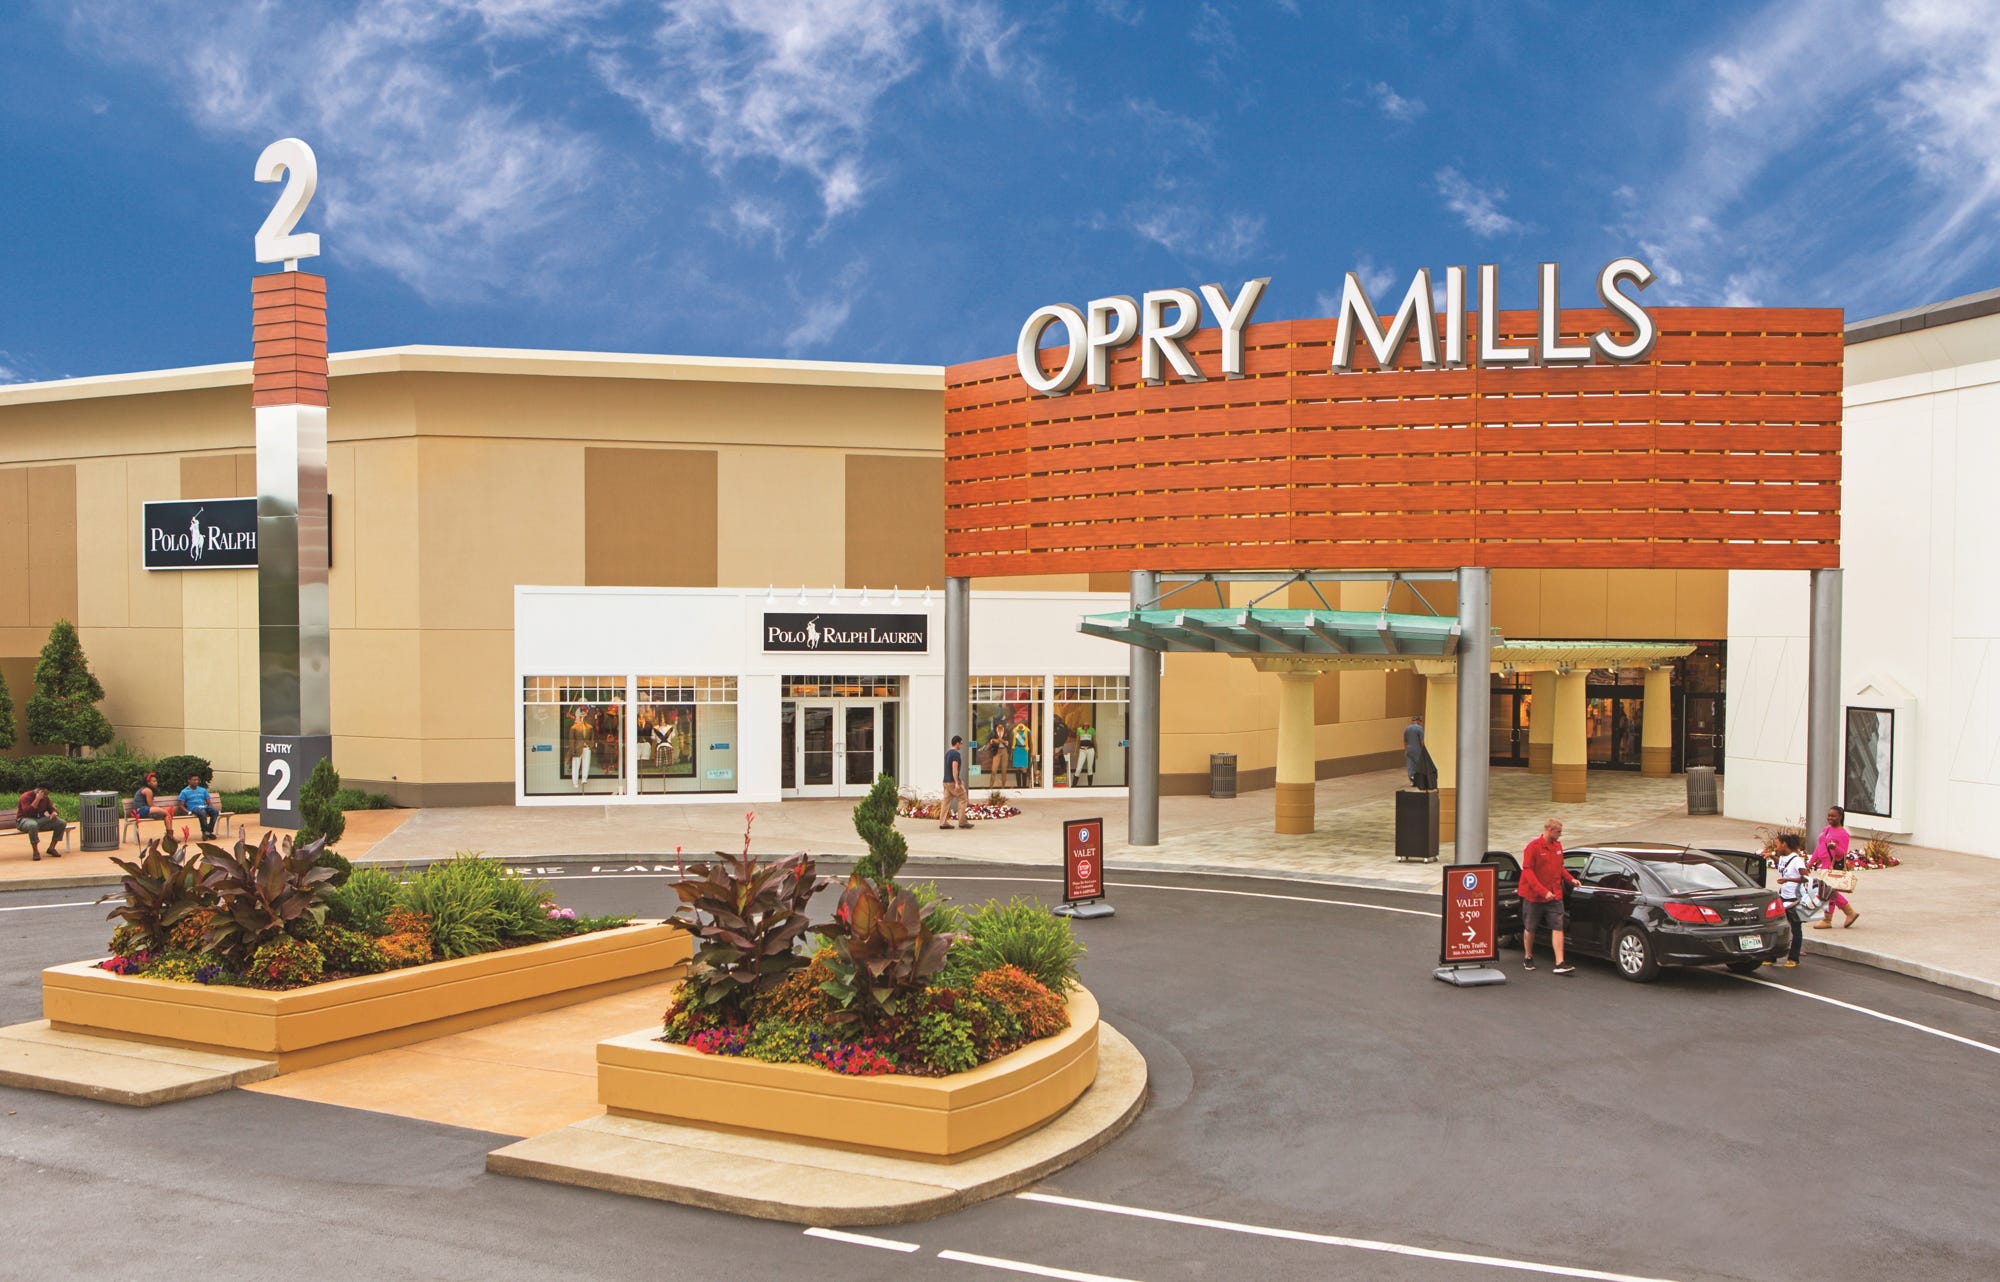 polo outlet opry mills